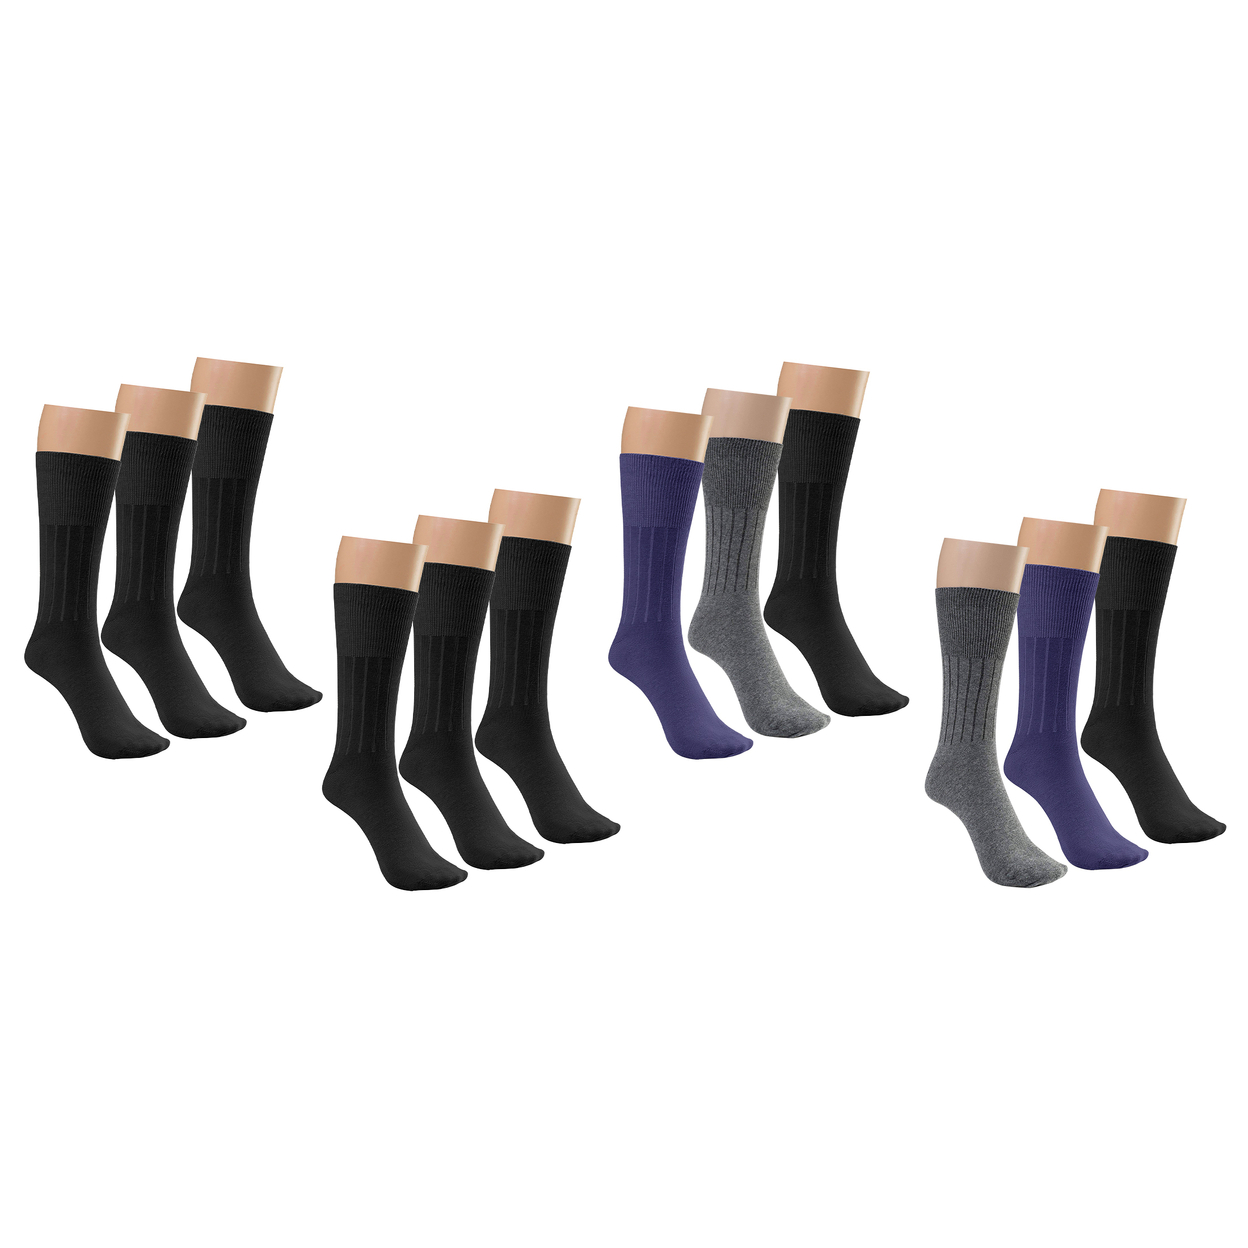 12-Pairs: Physician Approved Non-Binding Diabetic Circulatory Comfortable Moisture Wicking Dress Socks - Black